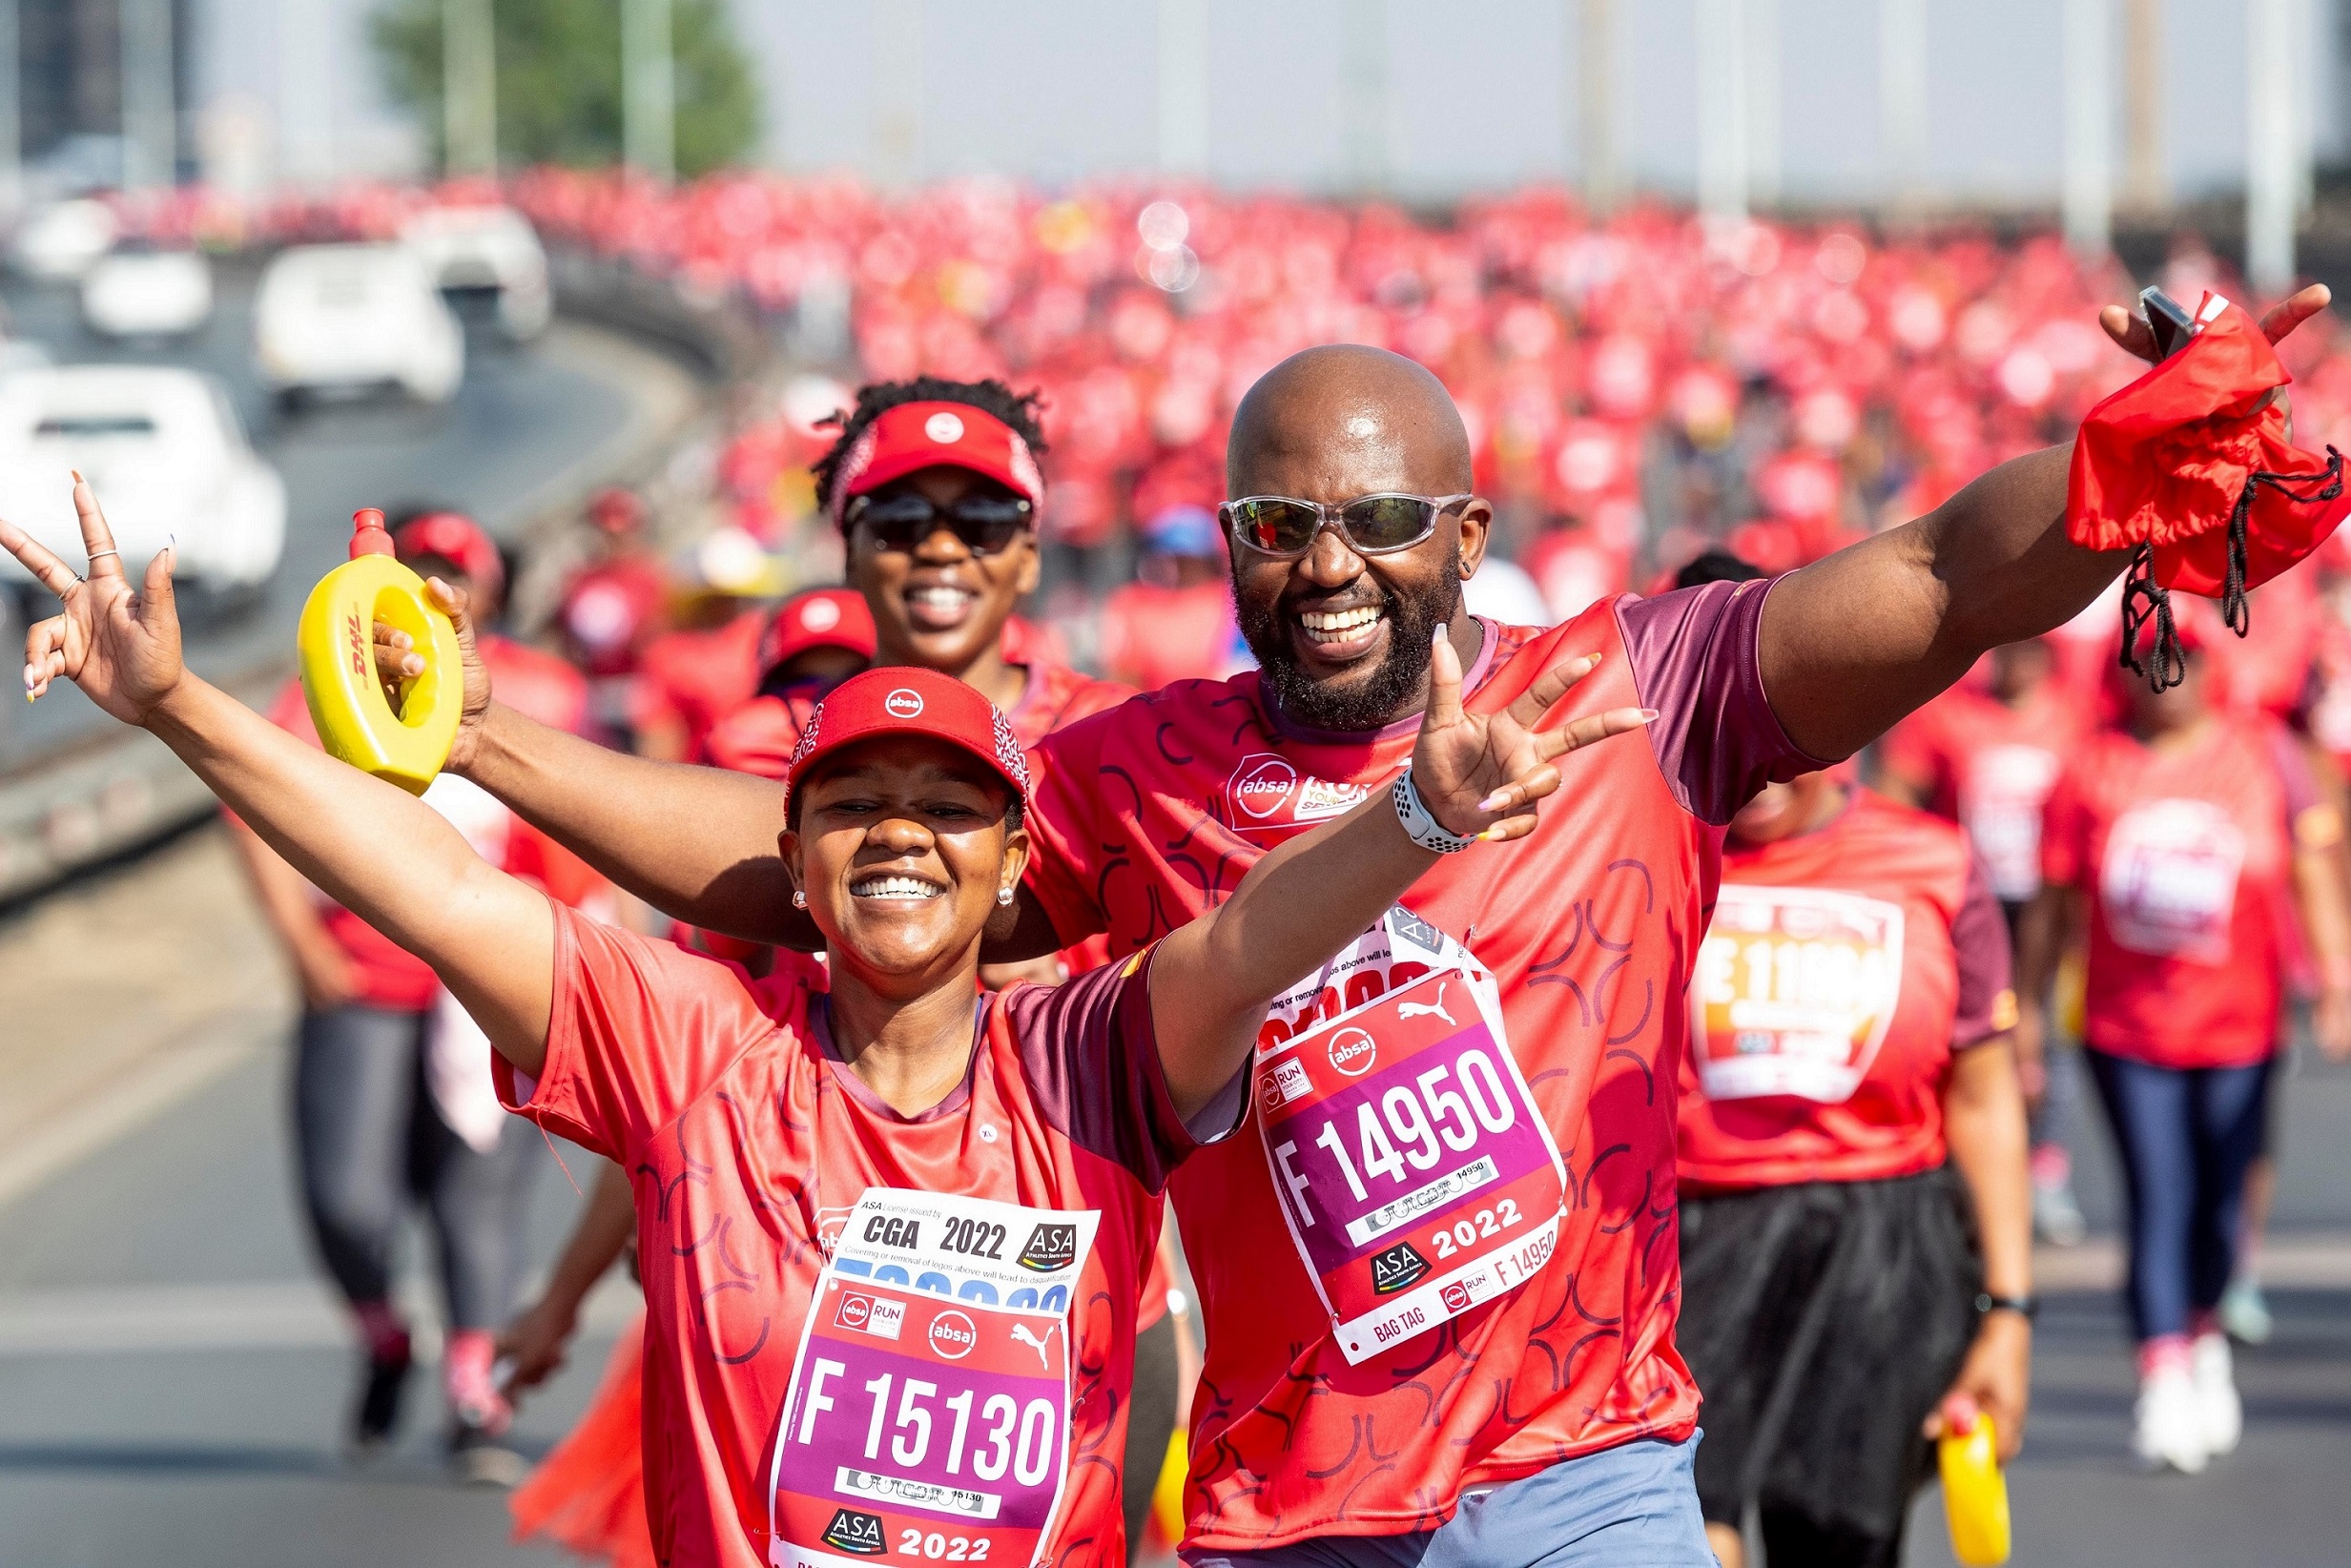 Absa RUN YOUR CITY Series Expands in 2023 Modern Athlete